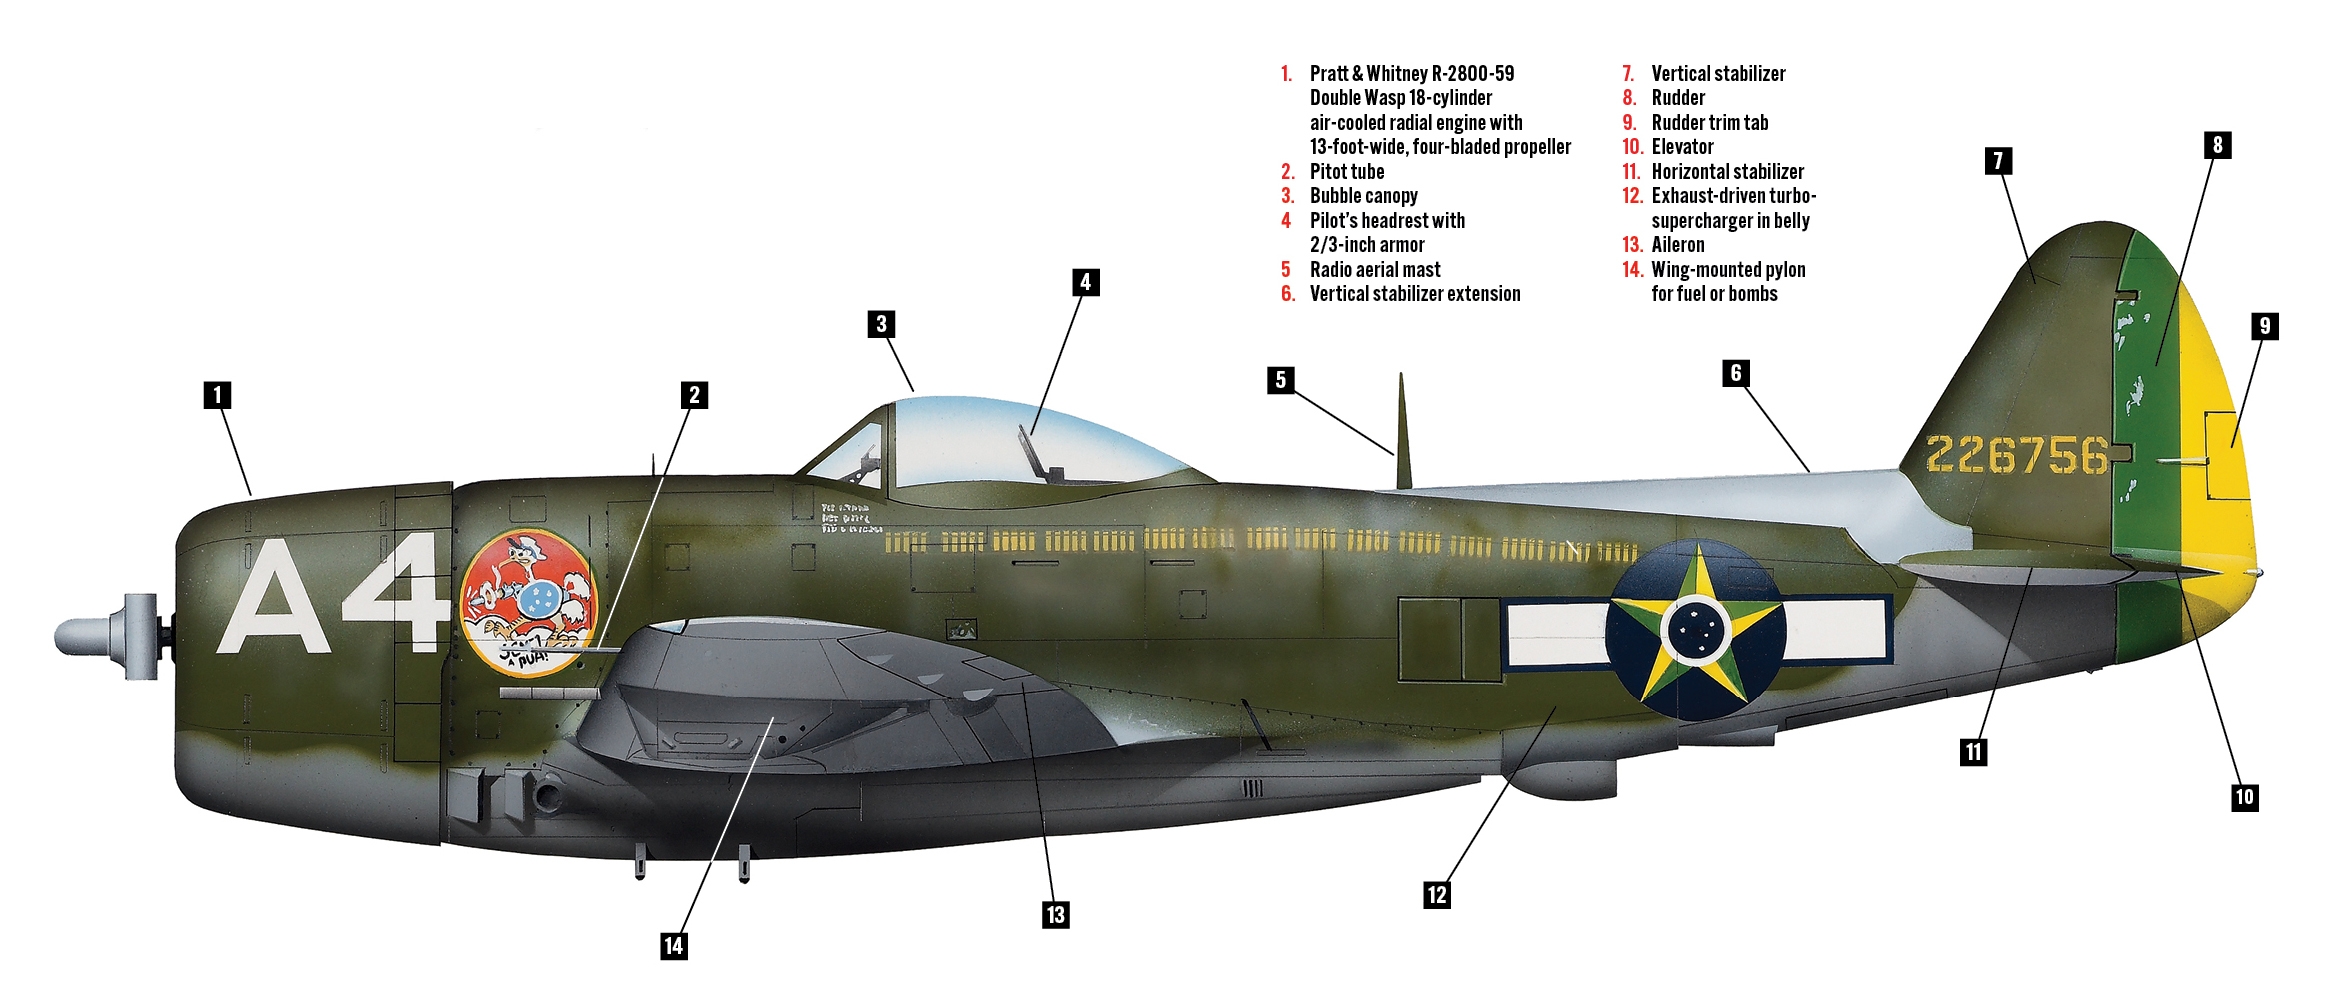 P-47D Thunderbolt: The Plane Brazilian Pilots Flew in WWII